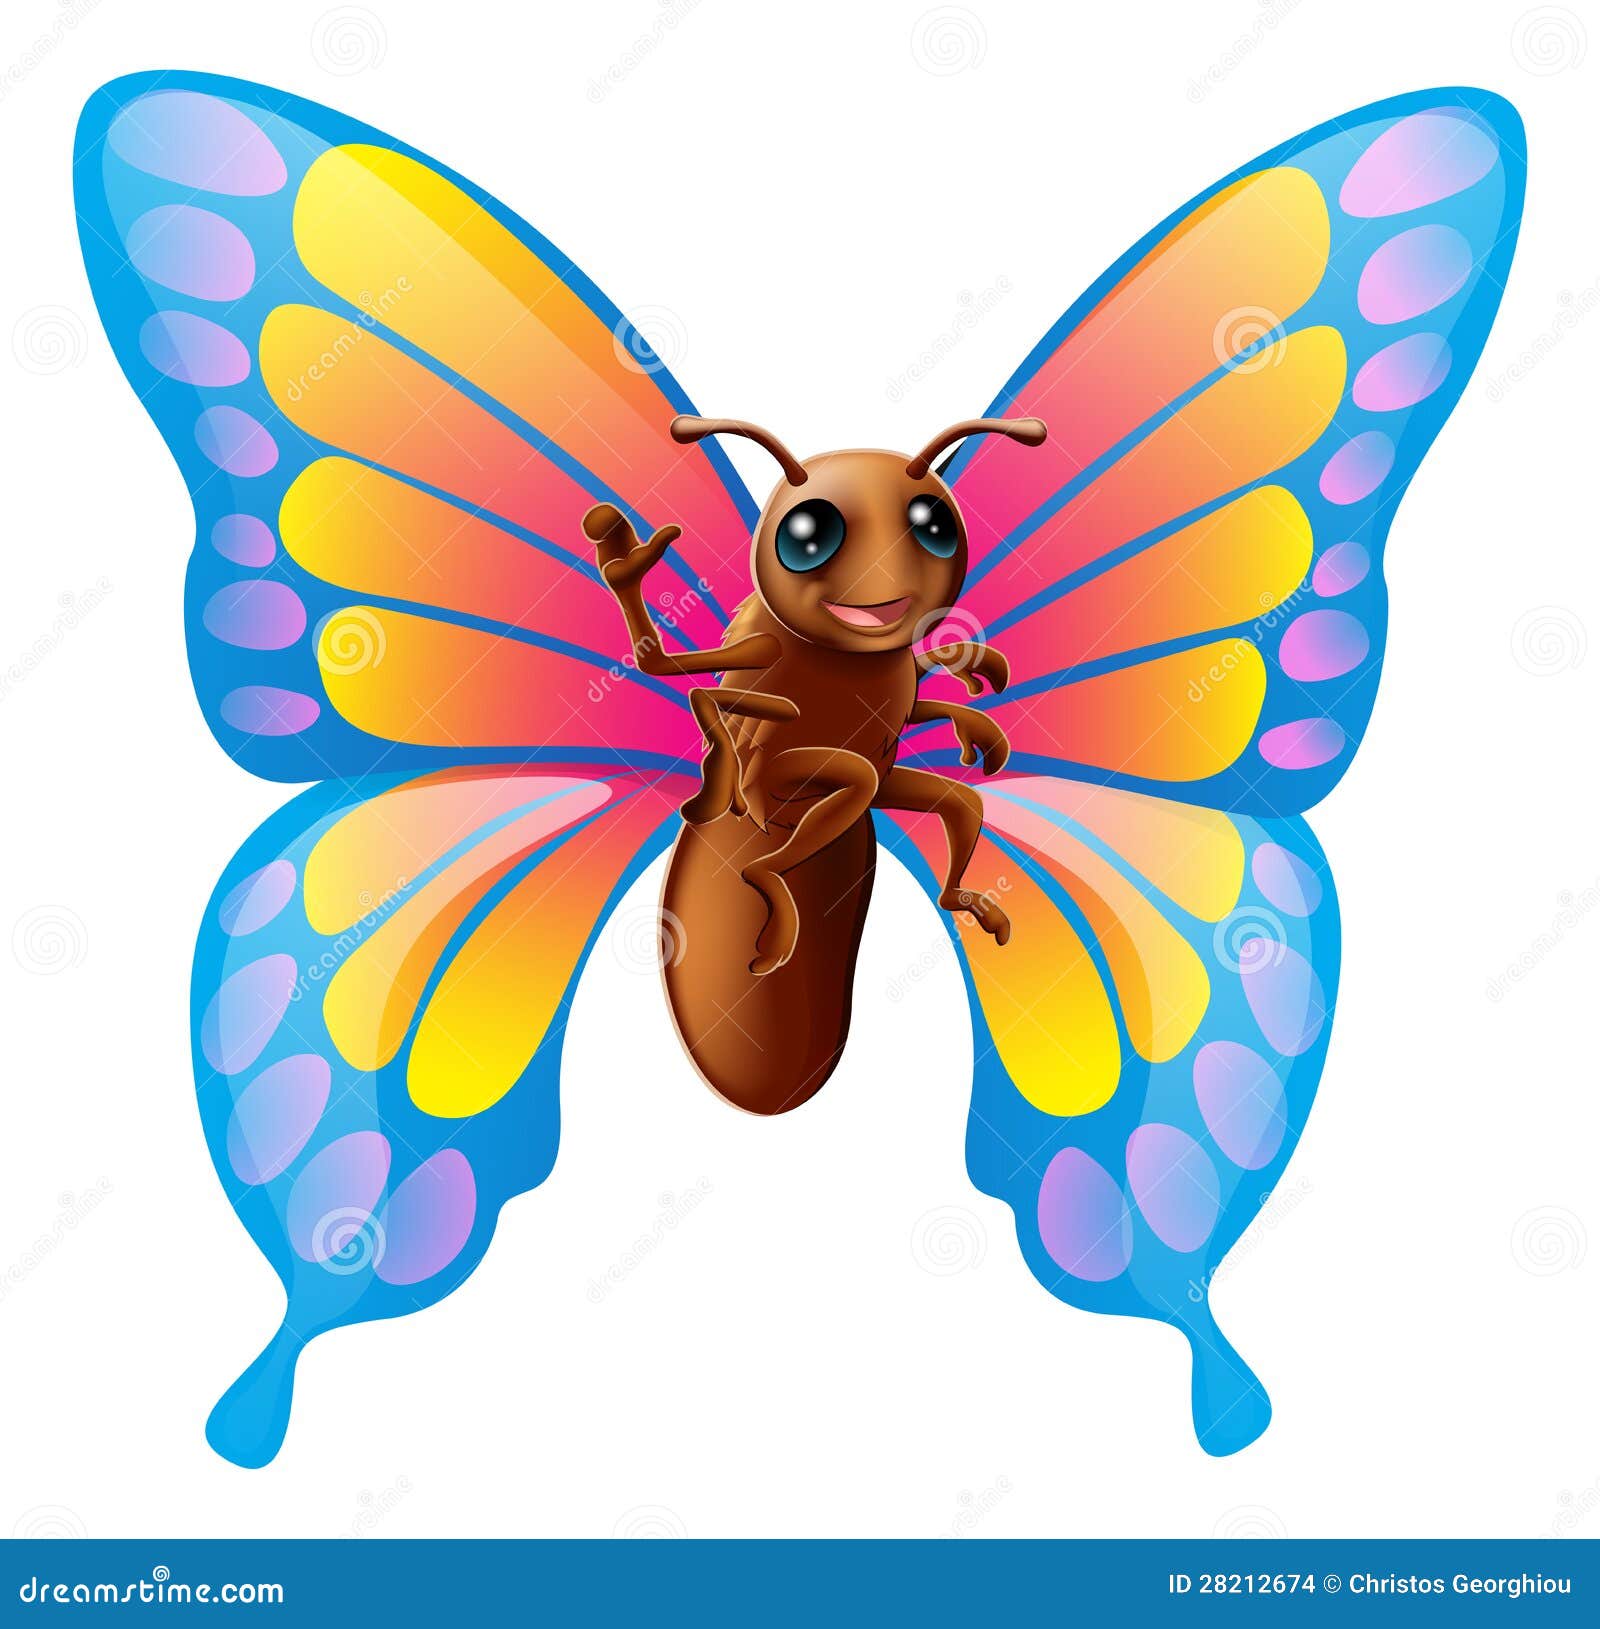 Cute cartoon butterfly stock vector. Illustration of smiling - 28212674